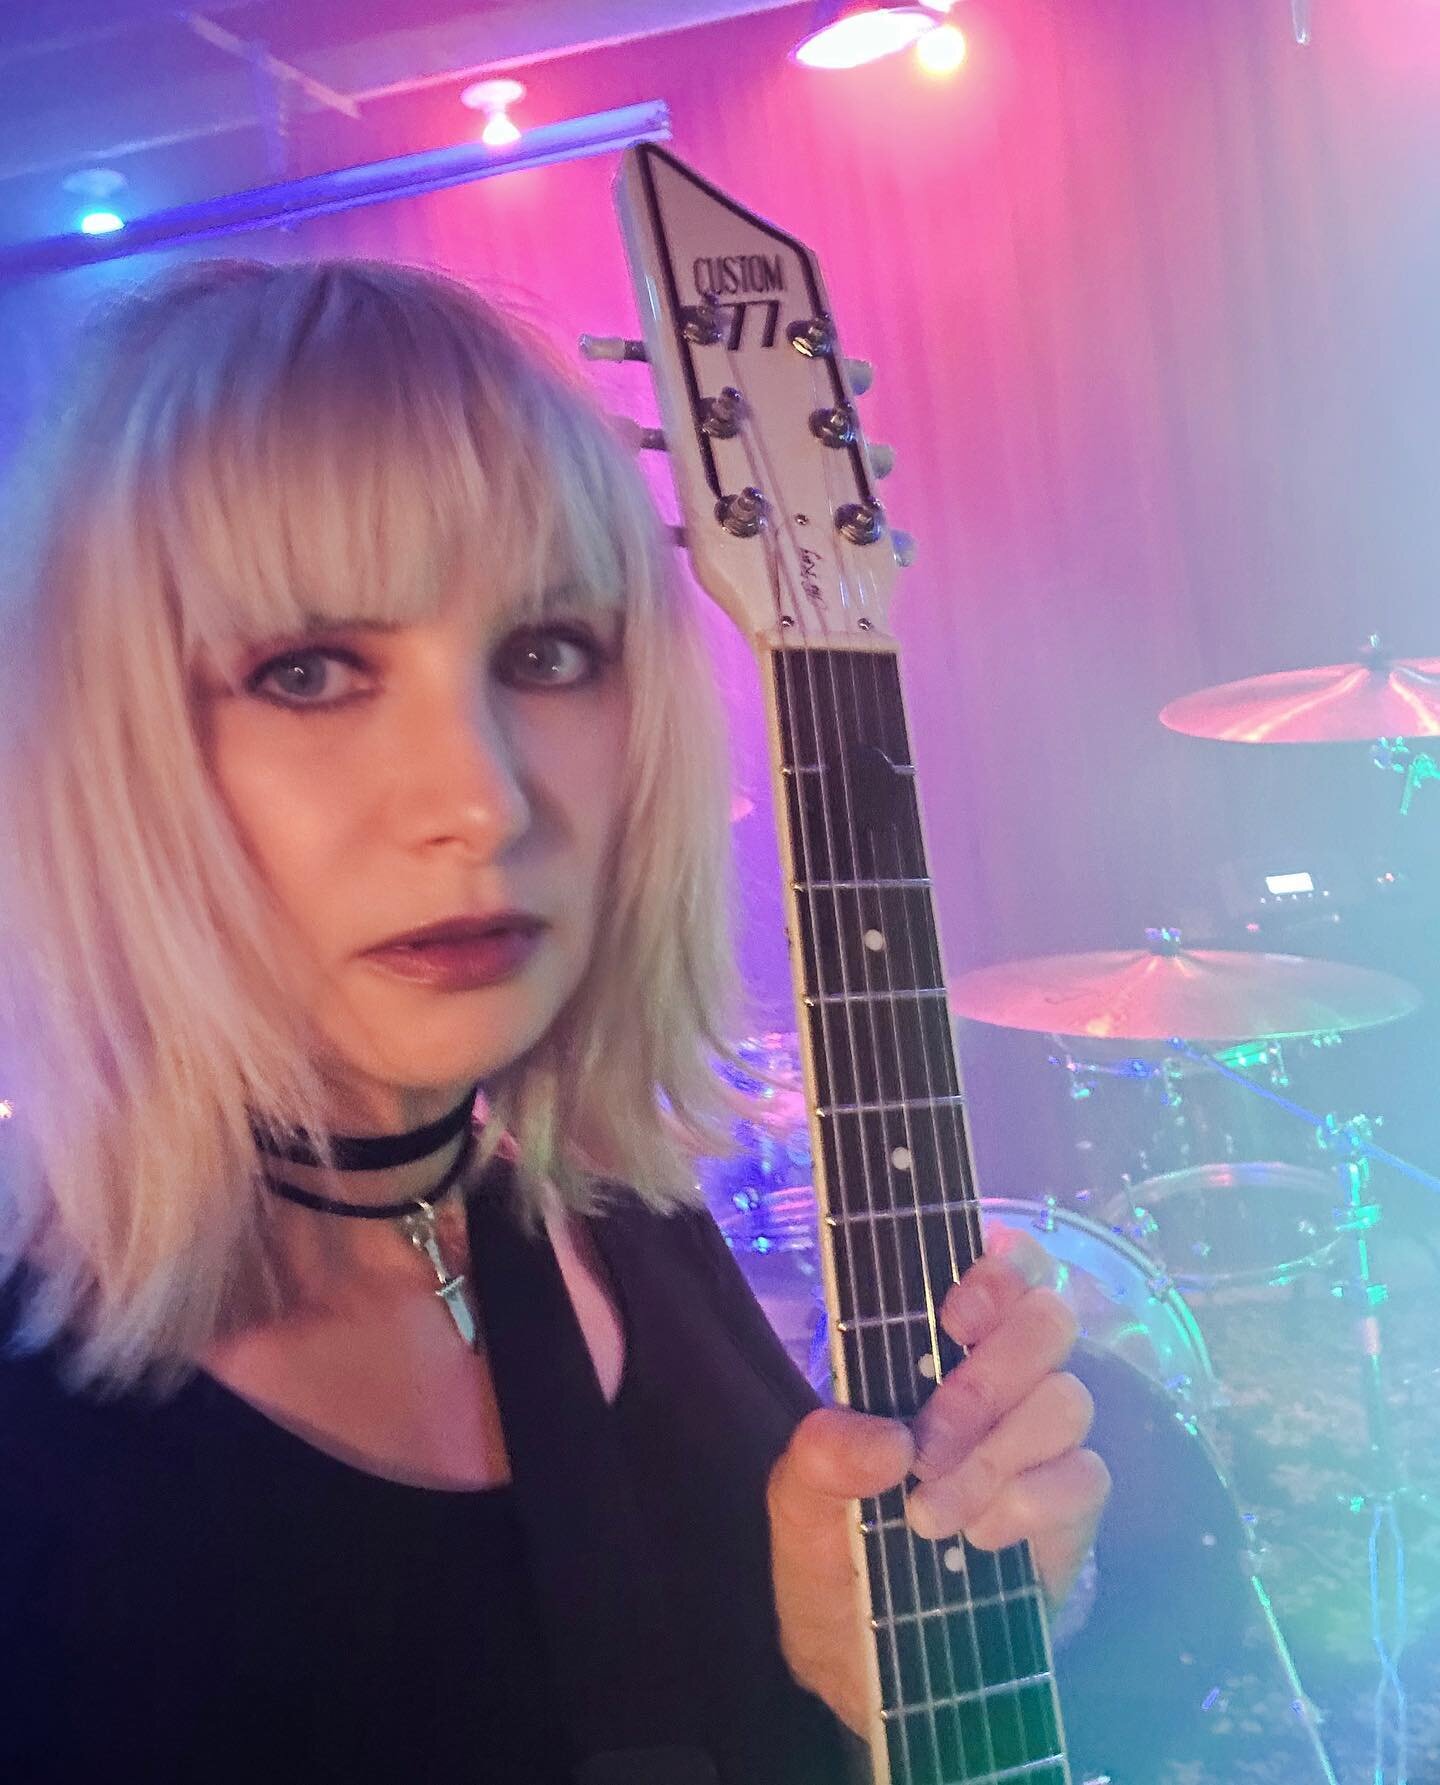 We&rsquo;ve wrapped up the video for our third and final single from our forthcoming album! 
Stay tuned this month- we&rsquo;re excited to share it with you all!